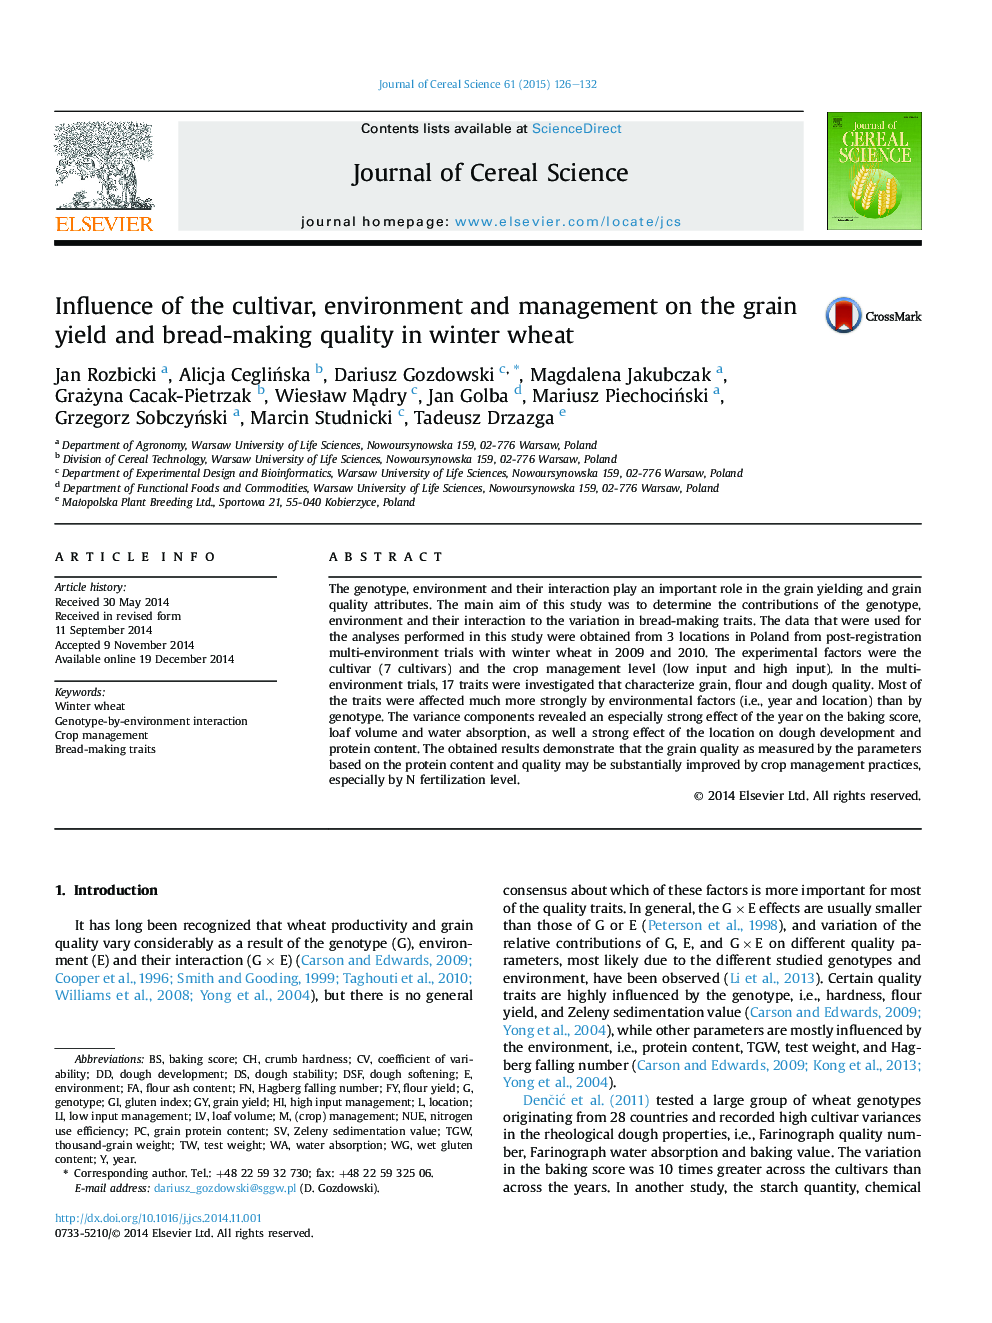 Influence of the cultivar, environment and management on the grain yield and bread-making quality in winter wheat